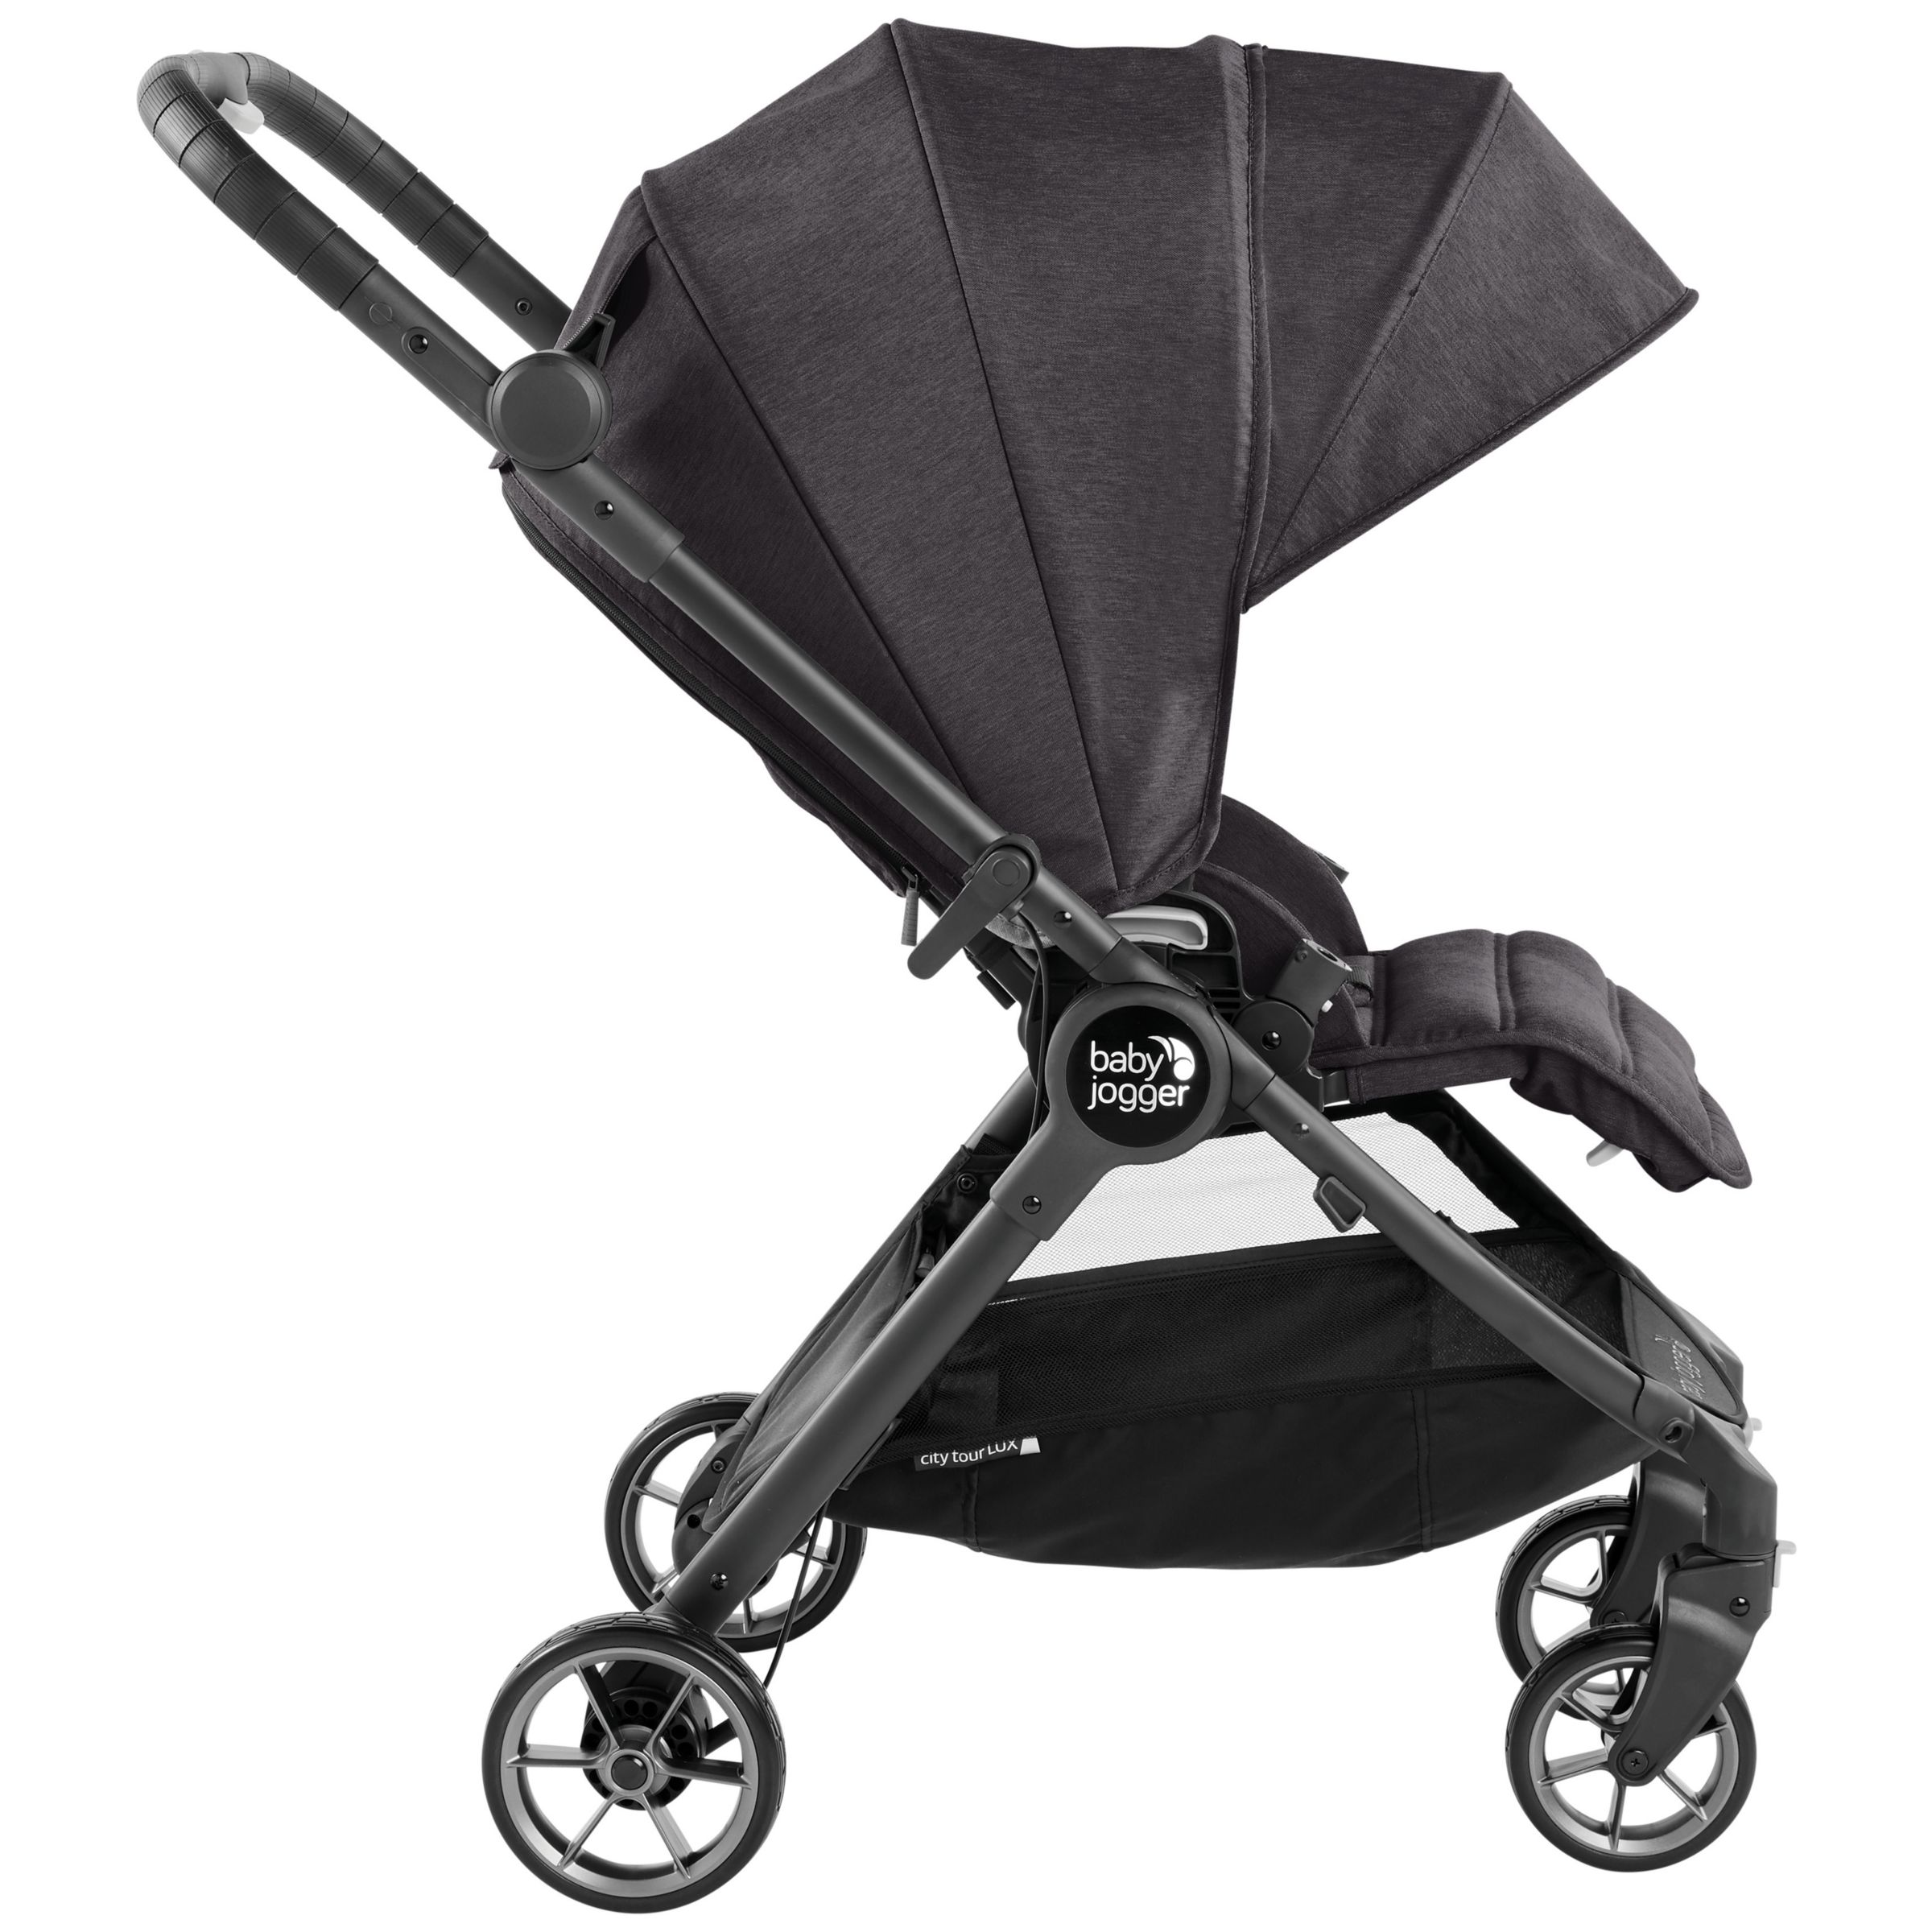 baby jogger city tour lux pushchair